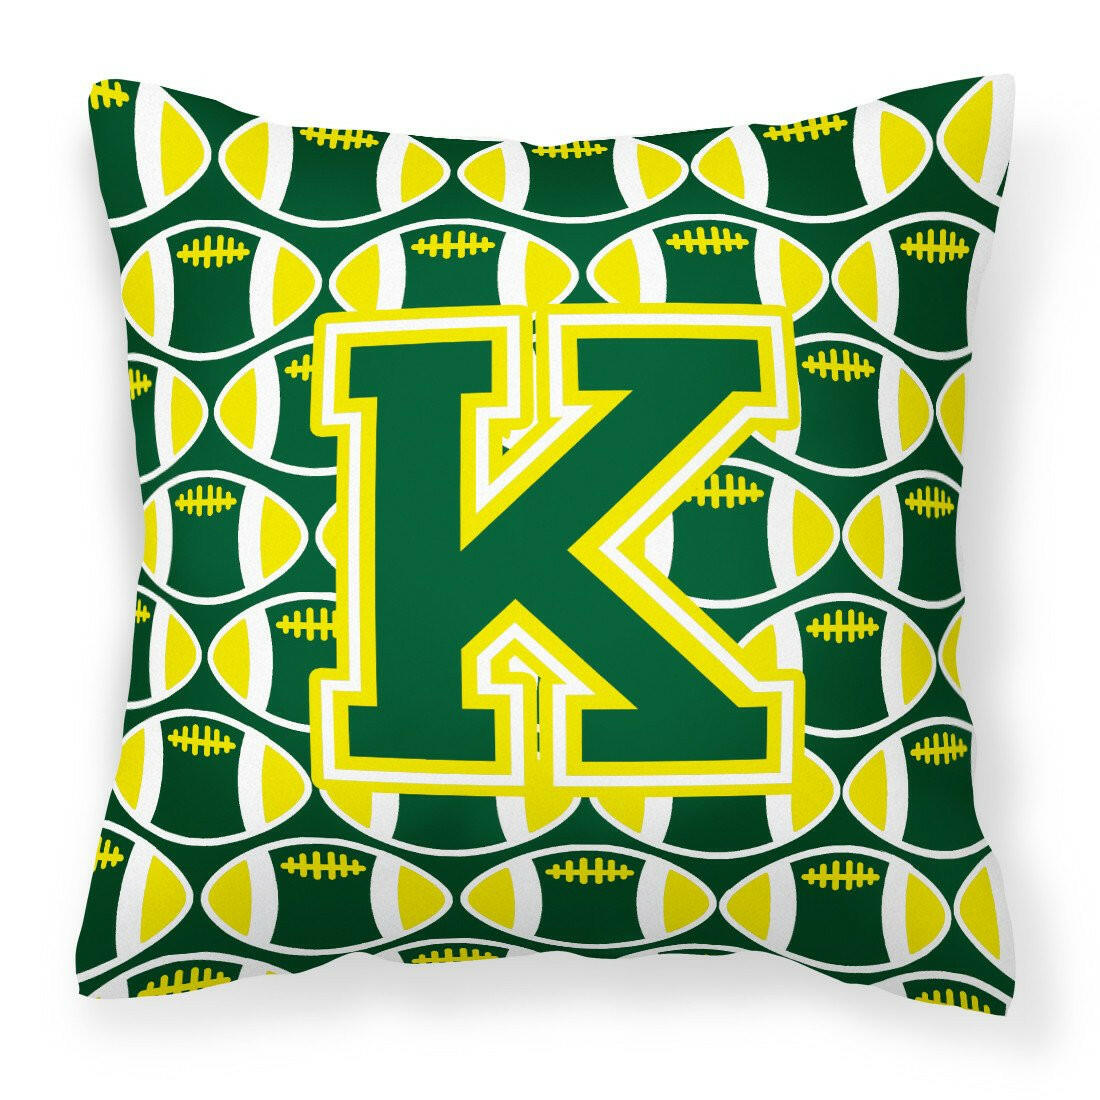 Letter K Football Green and Yellow Fabric Decorative Pillow CJ1075-KPW1414 by Caroline's Treasures